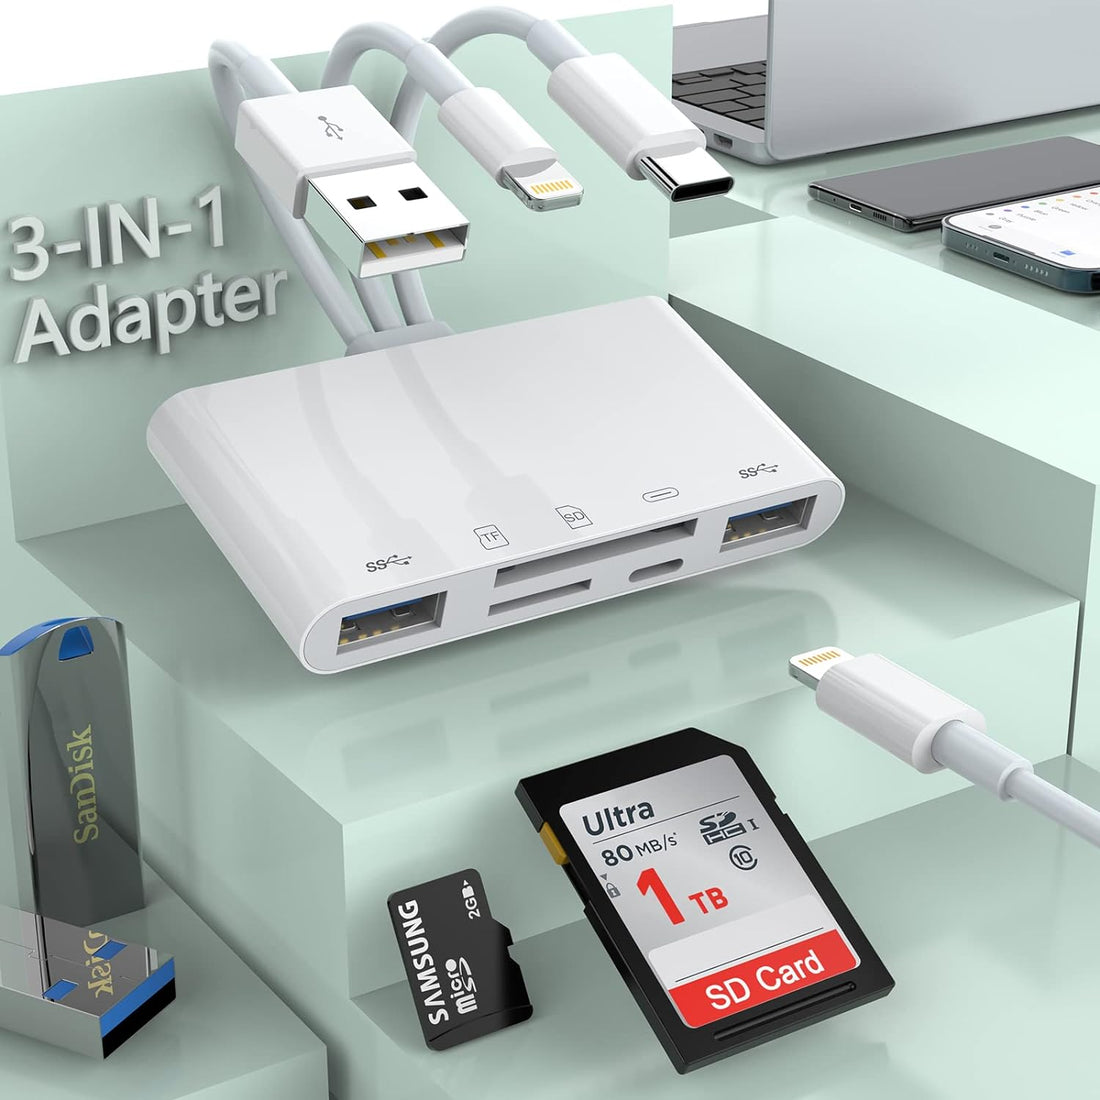 【Apple MFi Certified】 Multi 5-in-1 SD TF Memory Card Reader with SD/Micro SD/SDHC/SDXC/MMC，Lightning+Type C+USB A OTG Adapter for iPhone/iPad/Android/MacBook/PC/Tablet/Camera/Hard Disk/Flash Drive